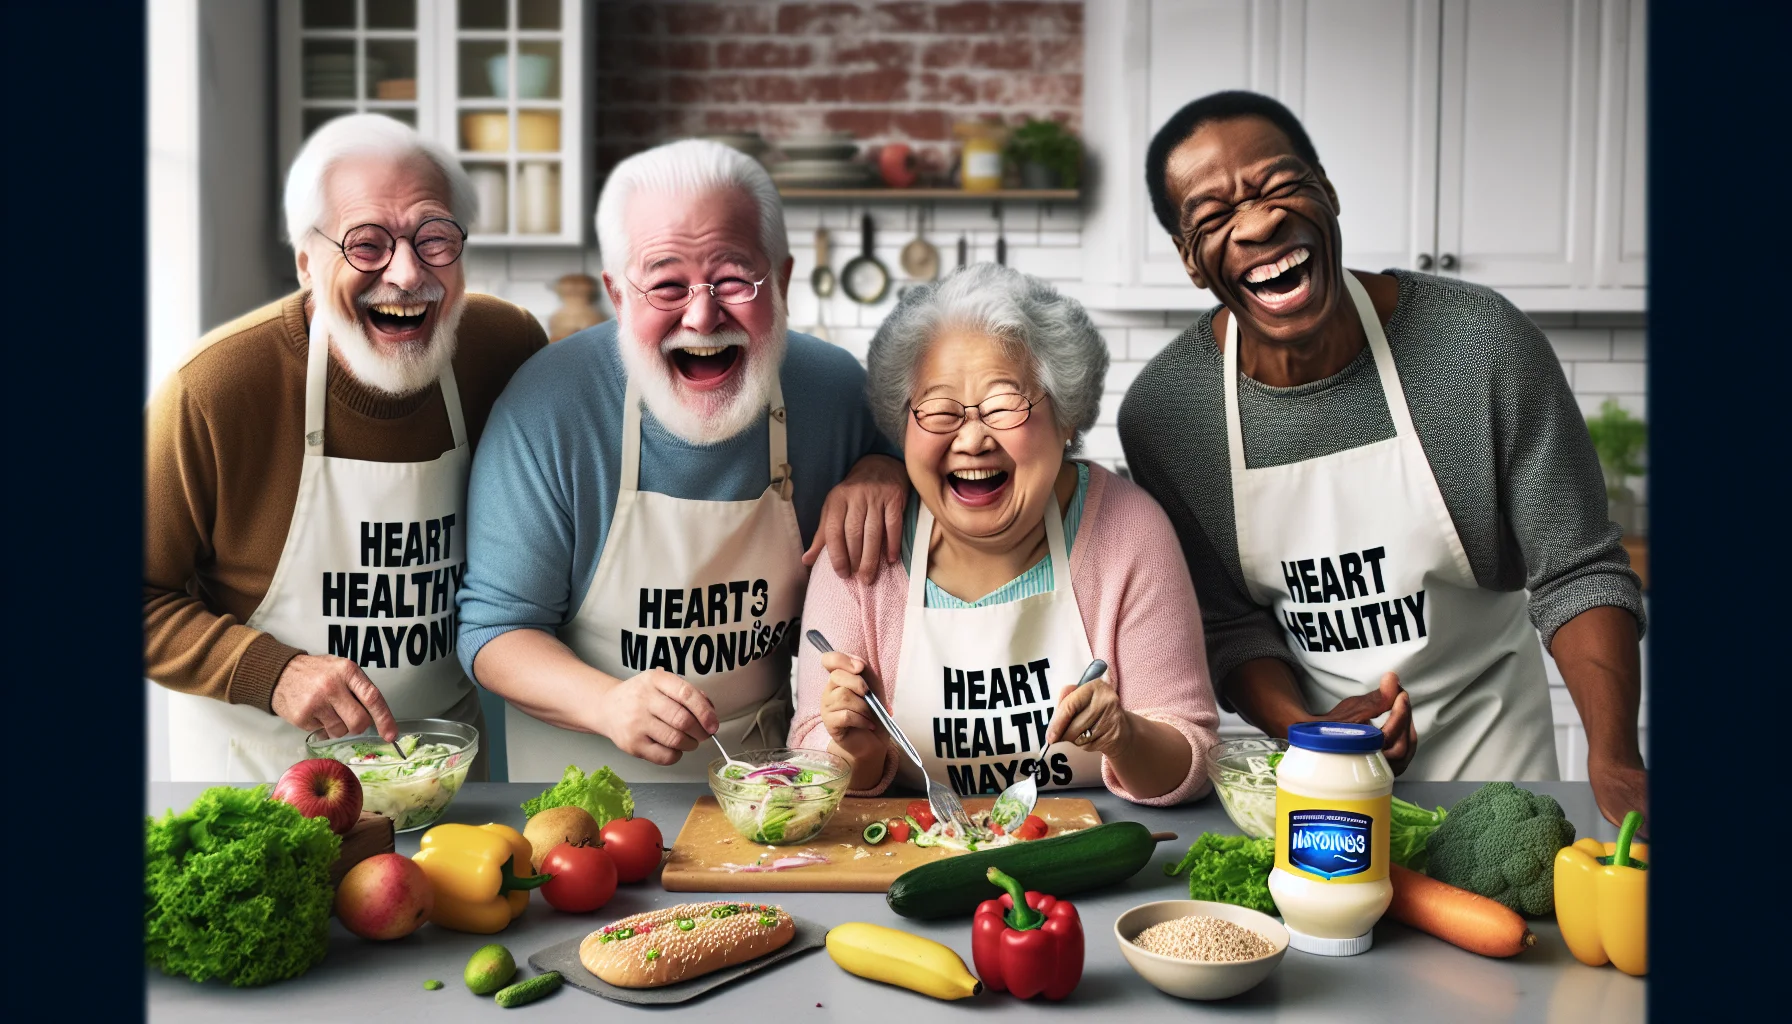 Create a humorous and realistic image of a lively, aged cooking club. It consists of four seniors: a lively Caucasian man, a jolly Hispanic woman, a cheerful Asian lady, and a humorous Black gentleman. They are all cooking together using 'Heart Healthy Mayonnaise.' The scene depicts them laughing and jesting as they try to create heart-friendly recipes. The counter is swamped with colorful vegetables, whole grains, and sparingly used heart healthy mayo. They are all donning aprons with funny slogans related to diets, aging, and eating healthy, bringing a light-hearted approach to their healthful cooking endeavor.